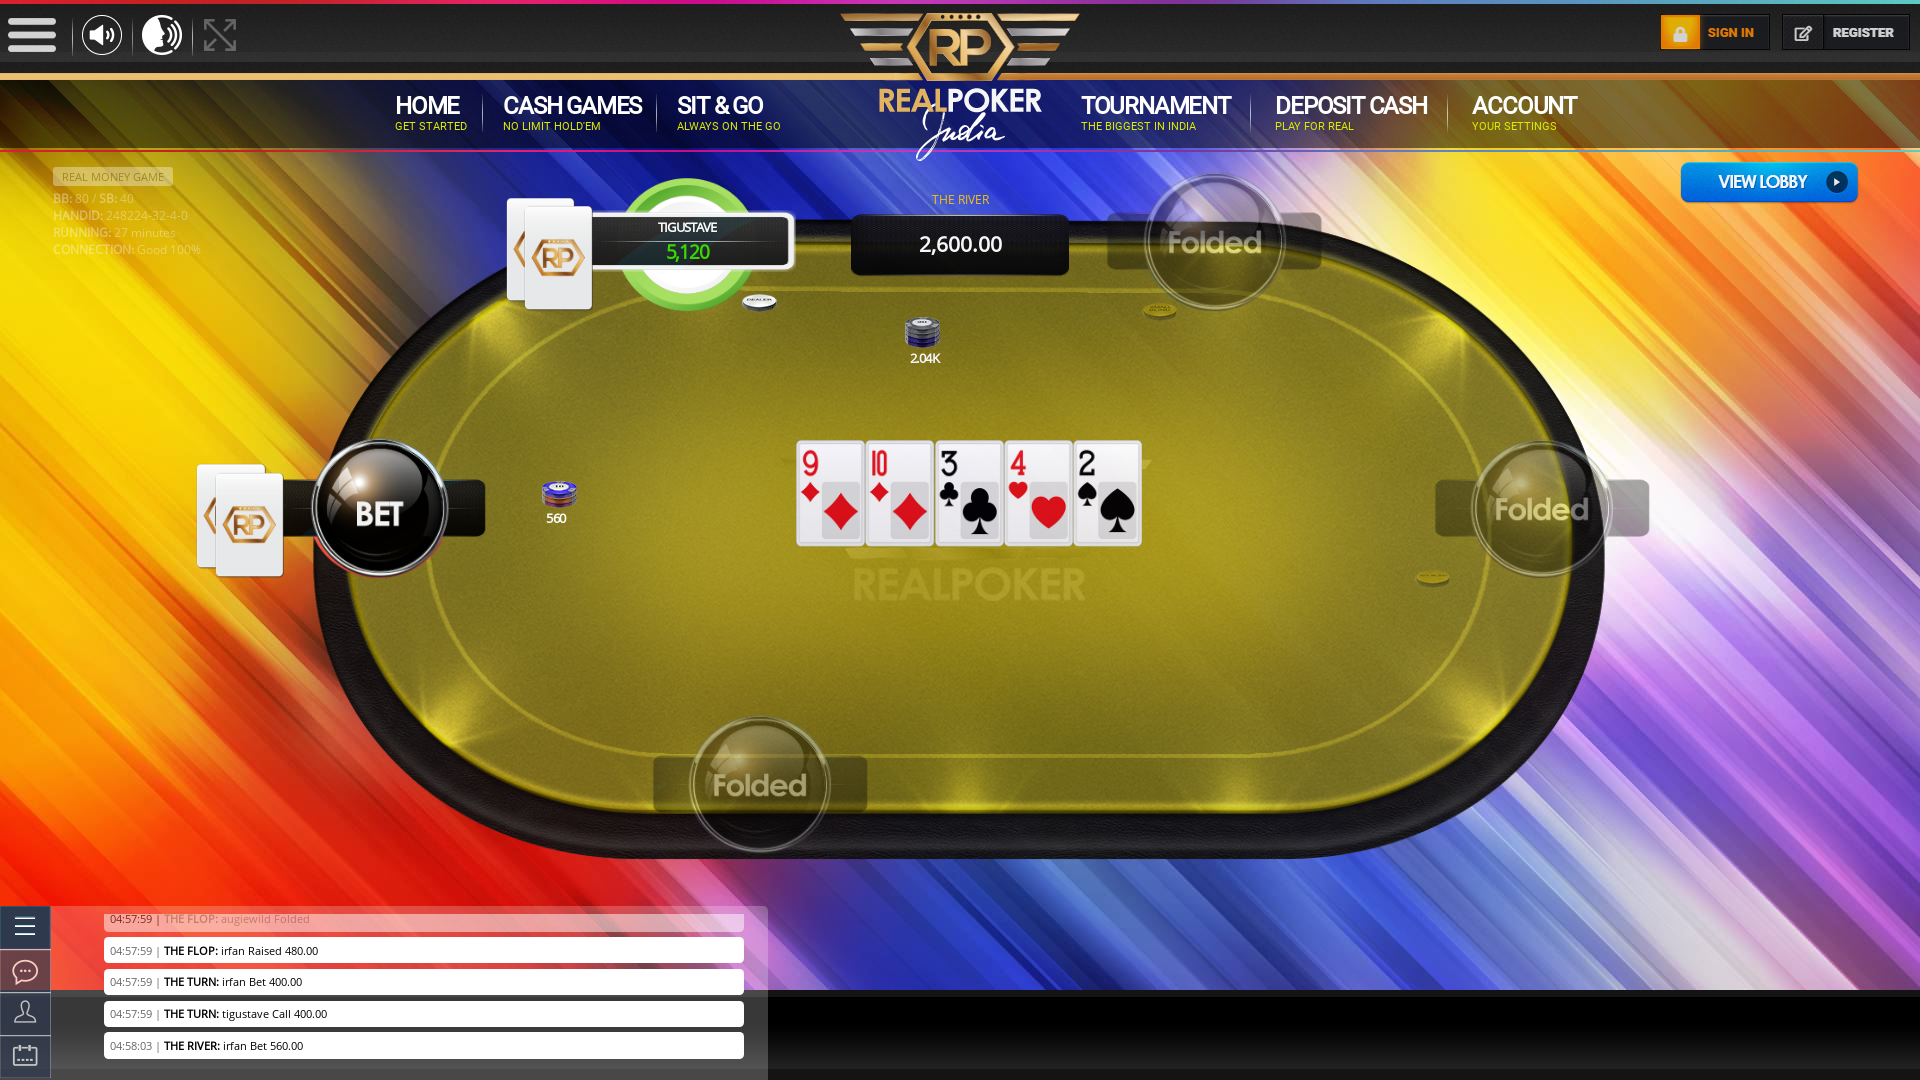 Vijayanagar, Bangalore texas holdem poker table on a 10 player table in the 27th minute of the game